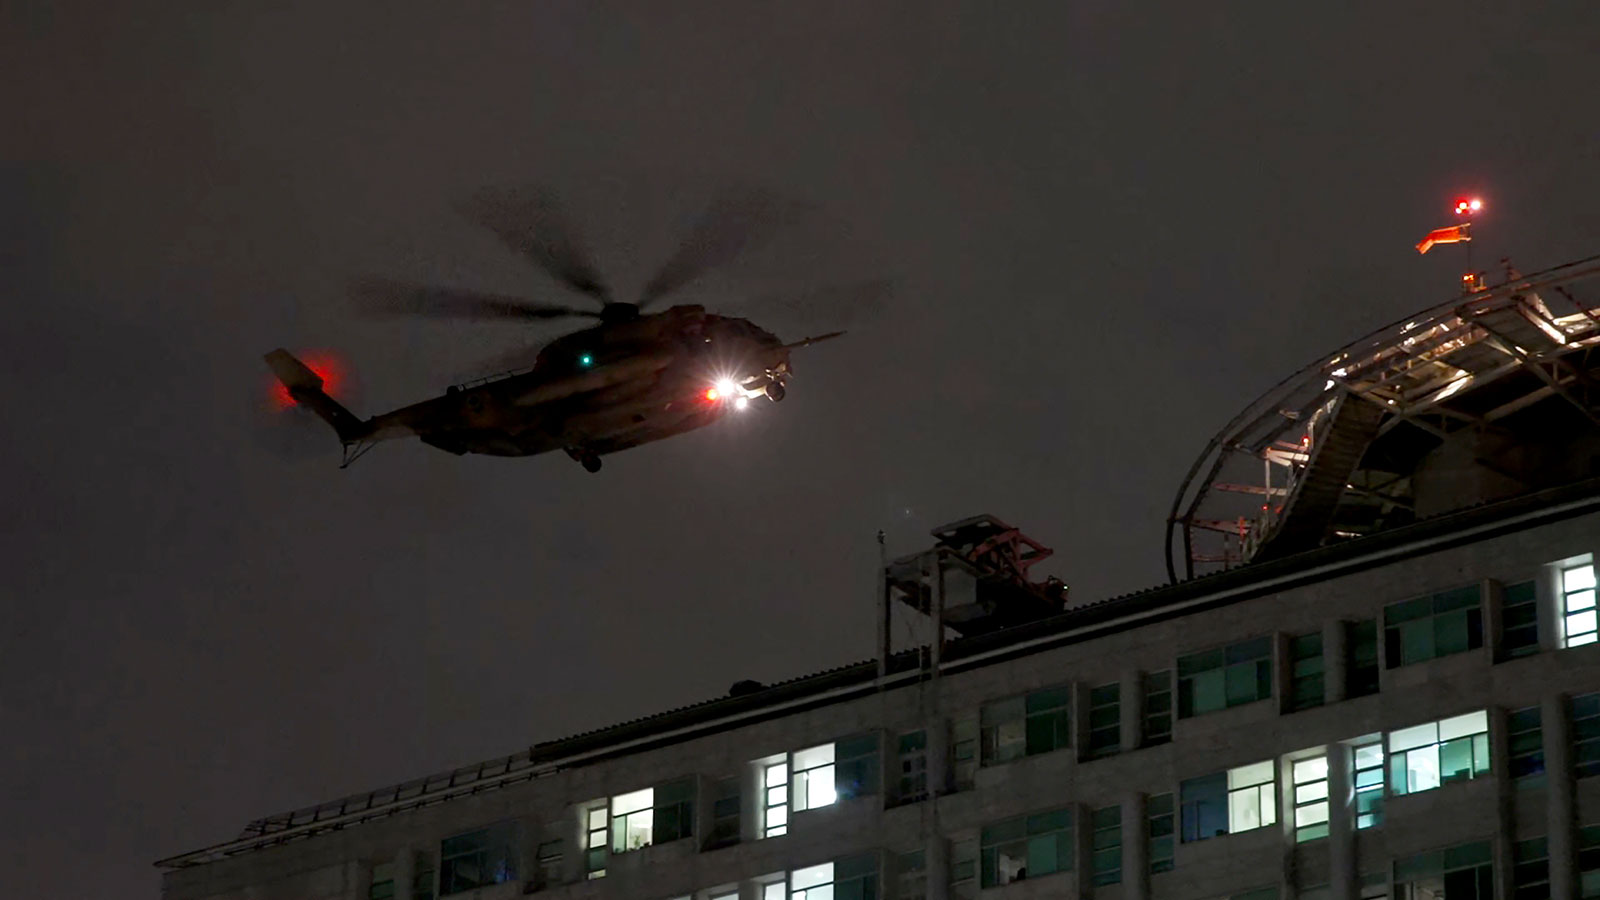 CNN’s team outside the Ichilov Hospital in Tel Aviv saw a helicopter with an unidentified number of hostages landing at the top of the facility.